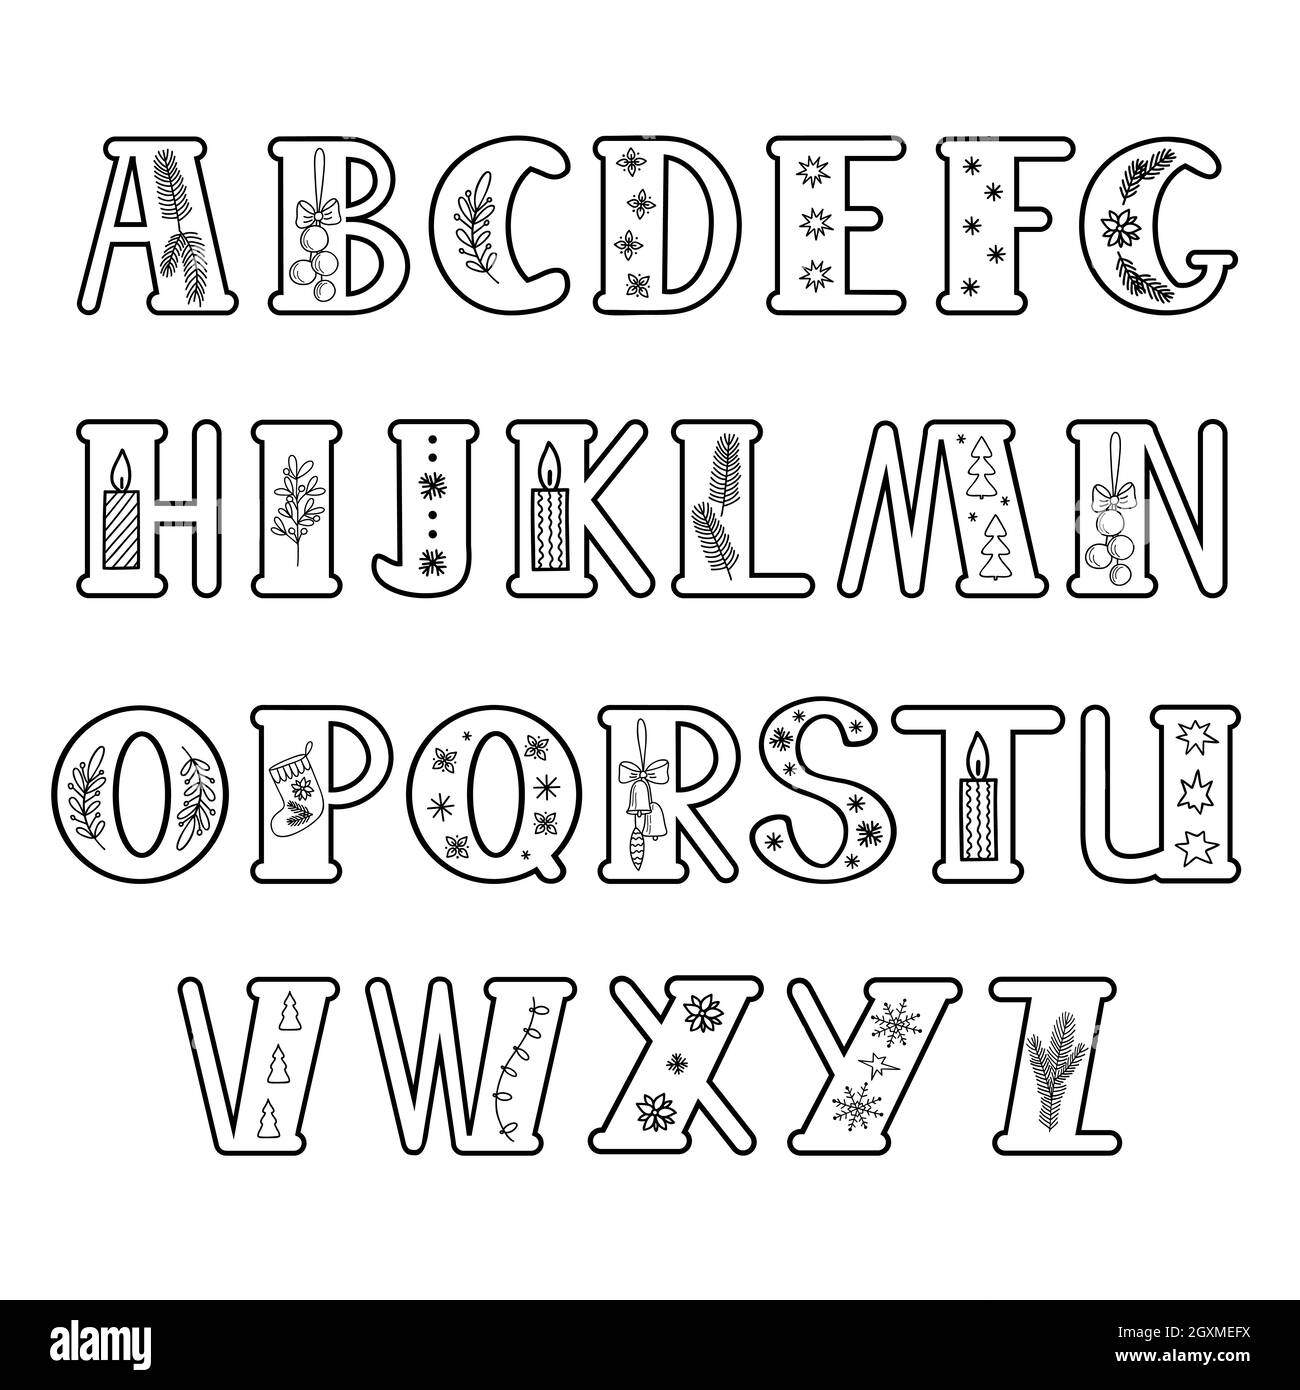 Capital hand drawn black letters of English alphabet decorated for